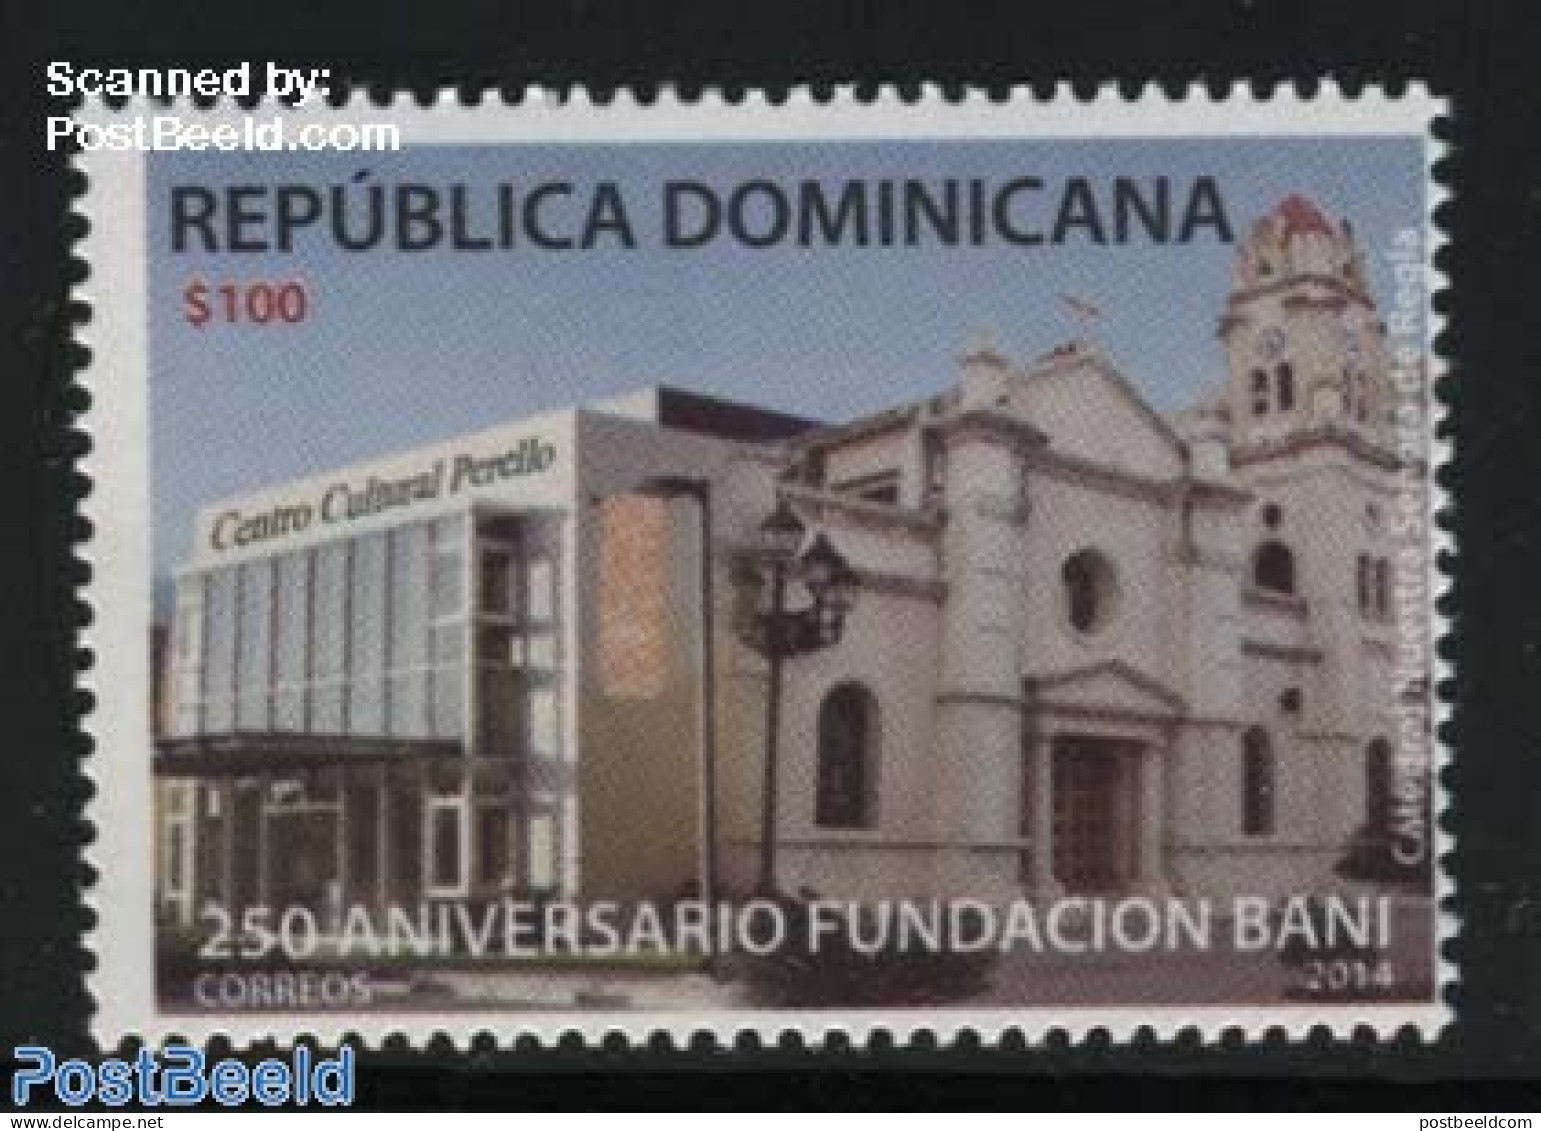 Dominican Republic 2015 Fundacion Bani 1v, Mint NH, Religion - Churches, Temples, Mosques, Synagogues - Churches & Cathedrals